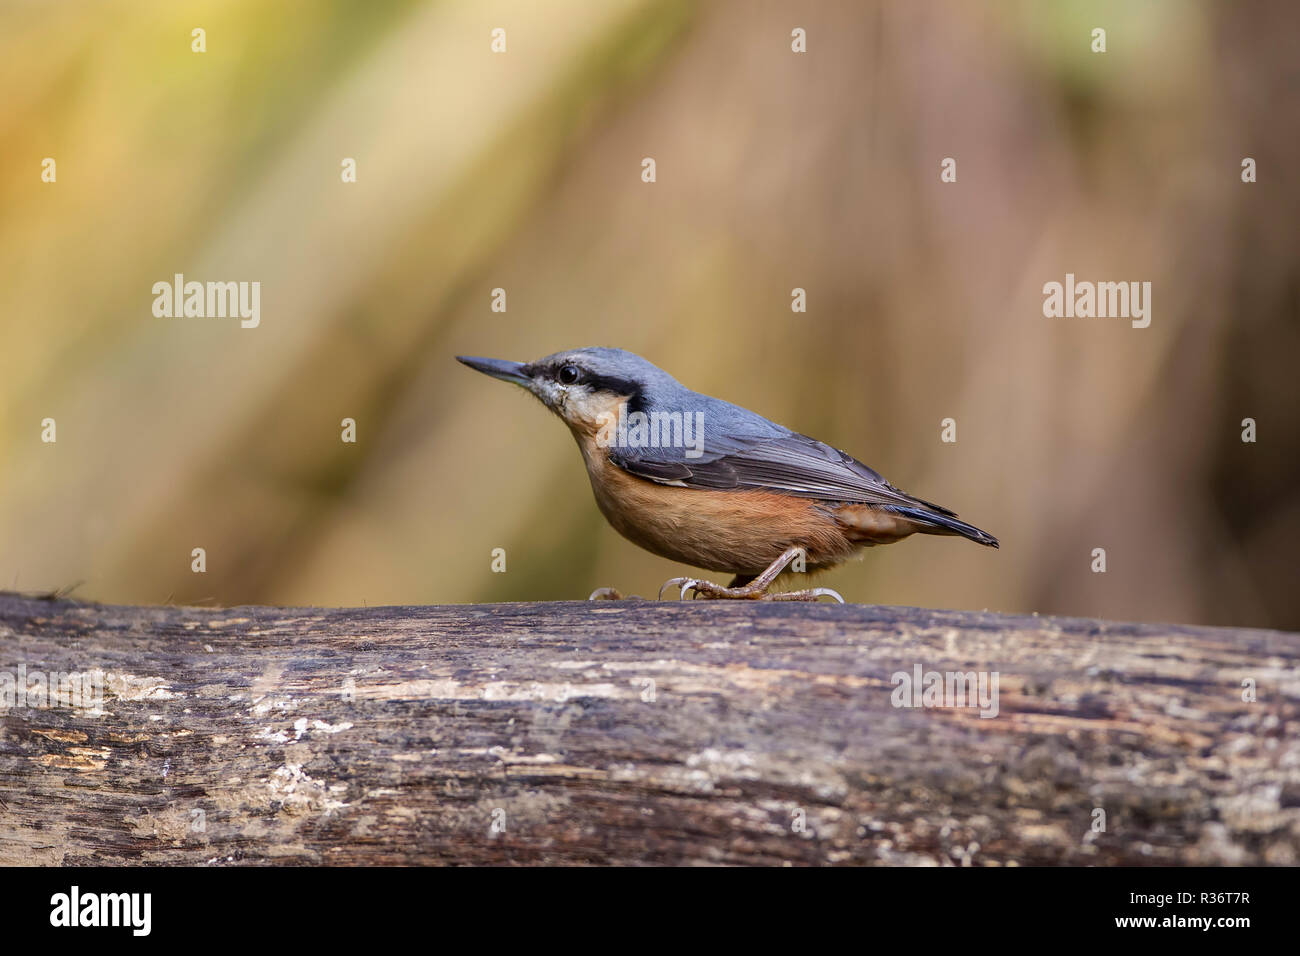 Nuthatch Sitta europaea in profile perching on a wooden log and showing its long slender bill and colourful plumage Stock Photo